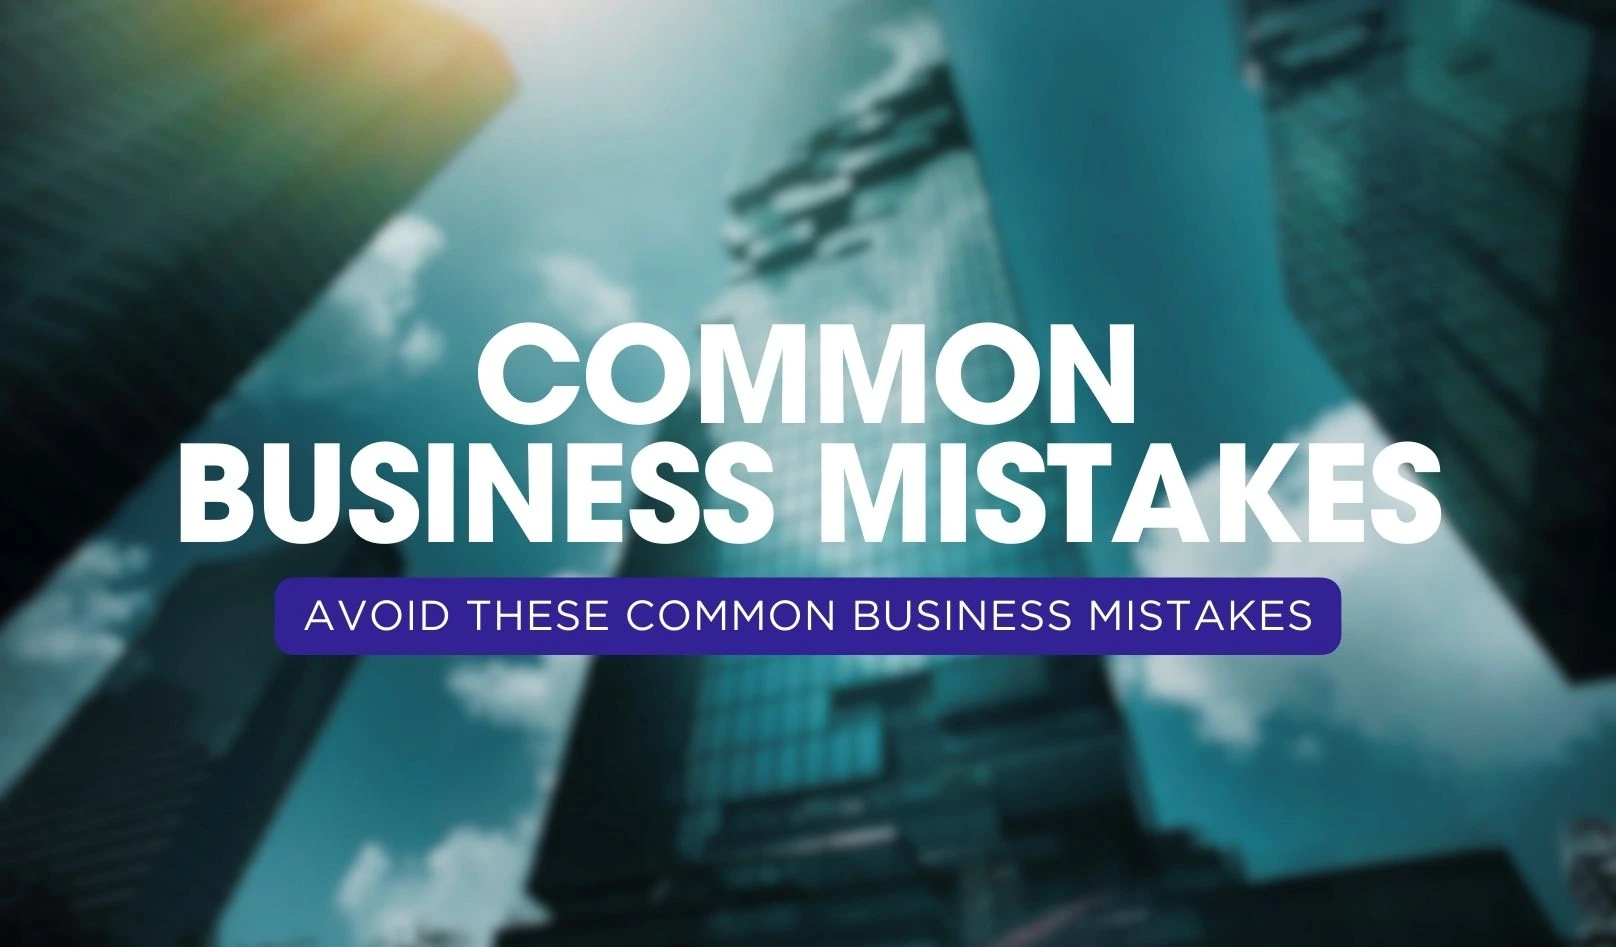 Common business mistakes to avoid